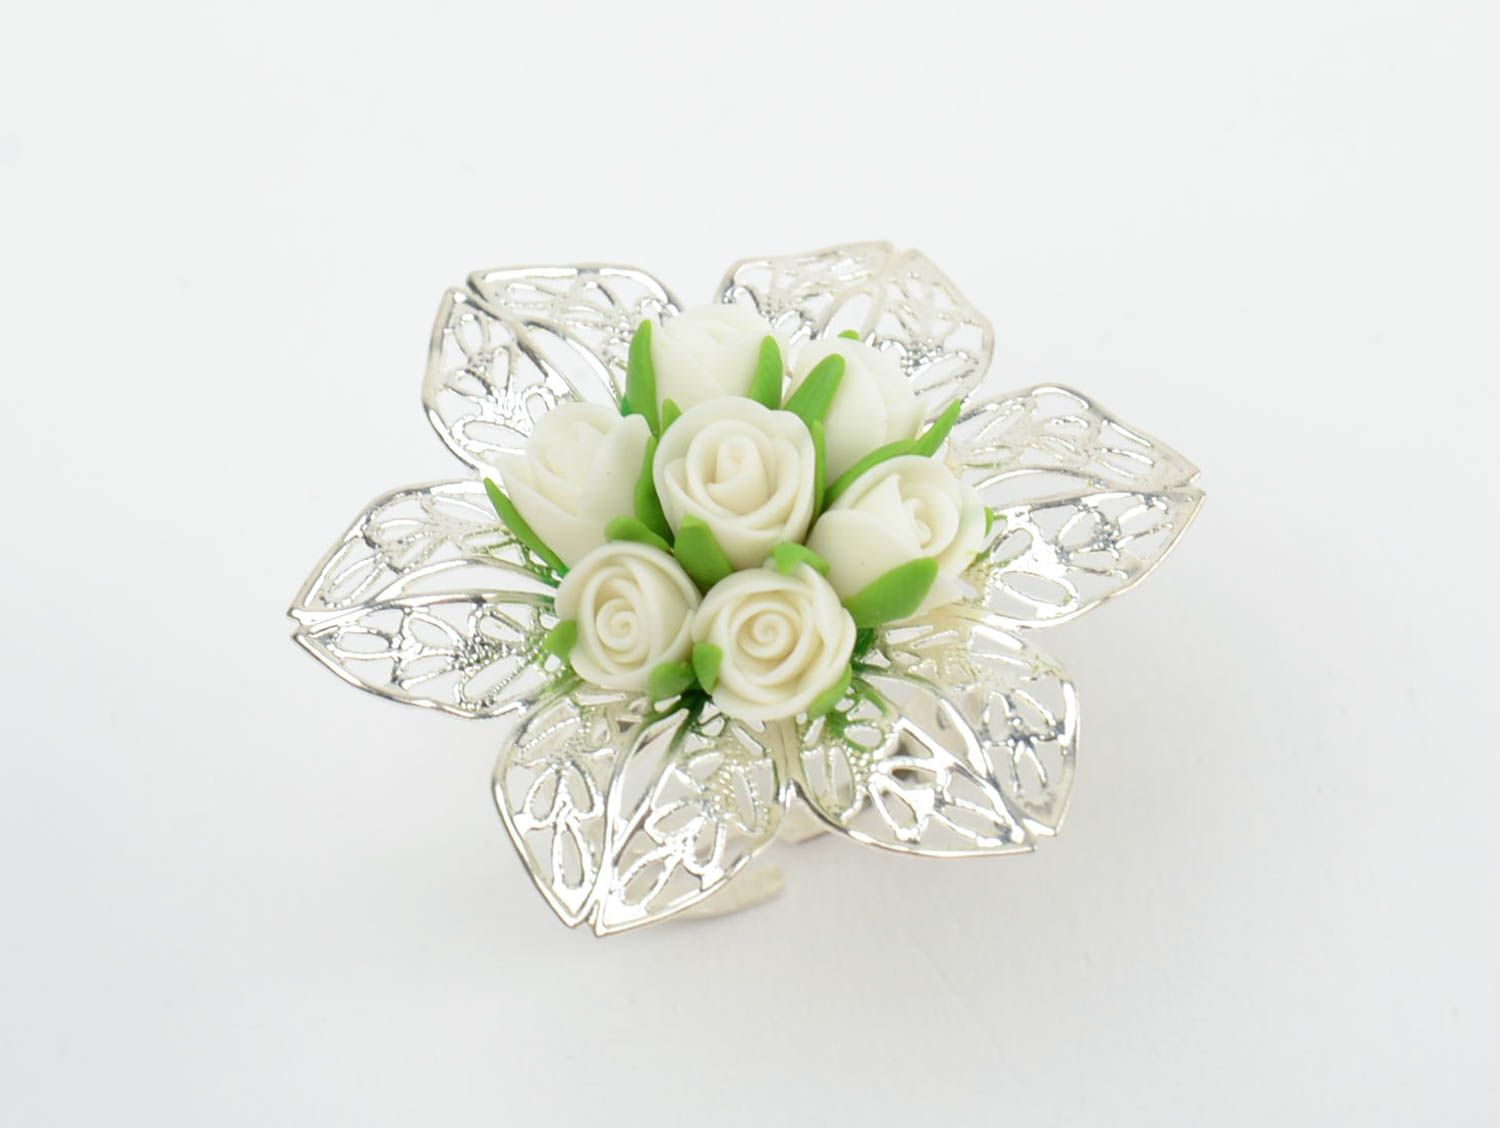 Handmade metal jewelry ring with large volume cold porcelain white rose flowers photo 3